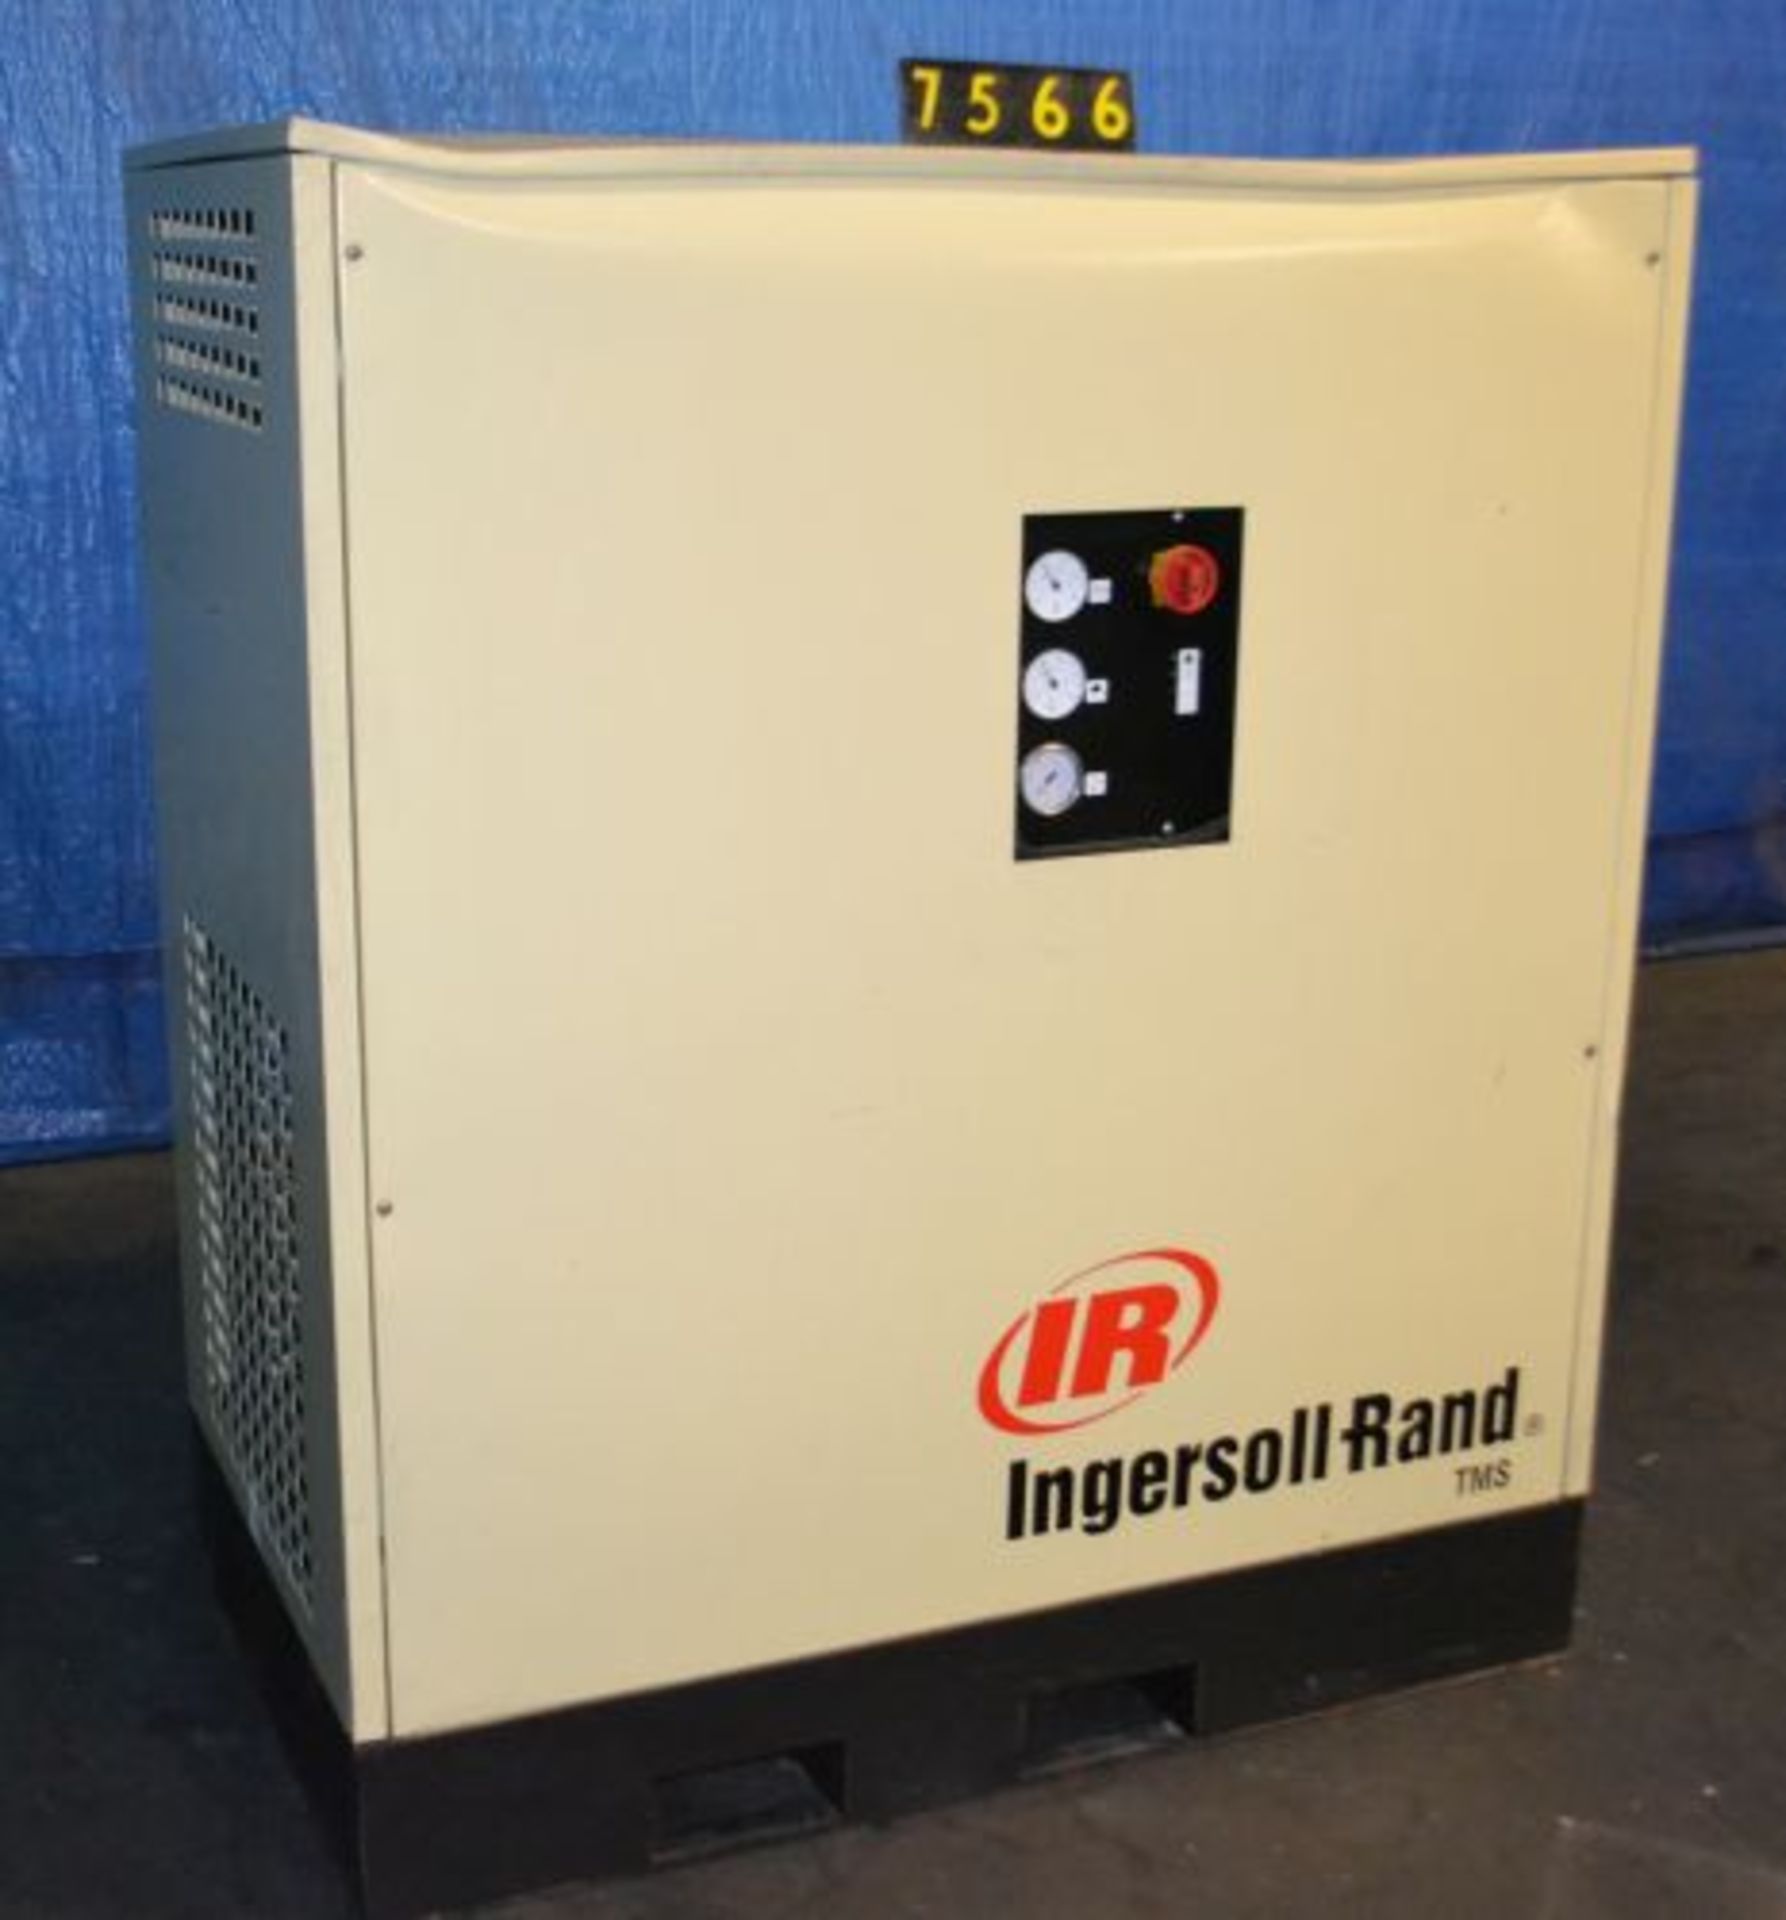 Ingersoll-Rand model number TMS0380 air dryer - Image 3 of 5